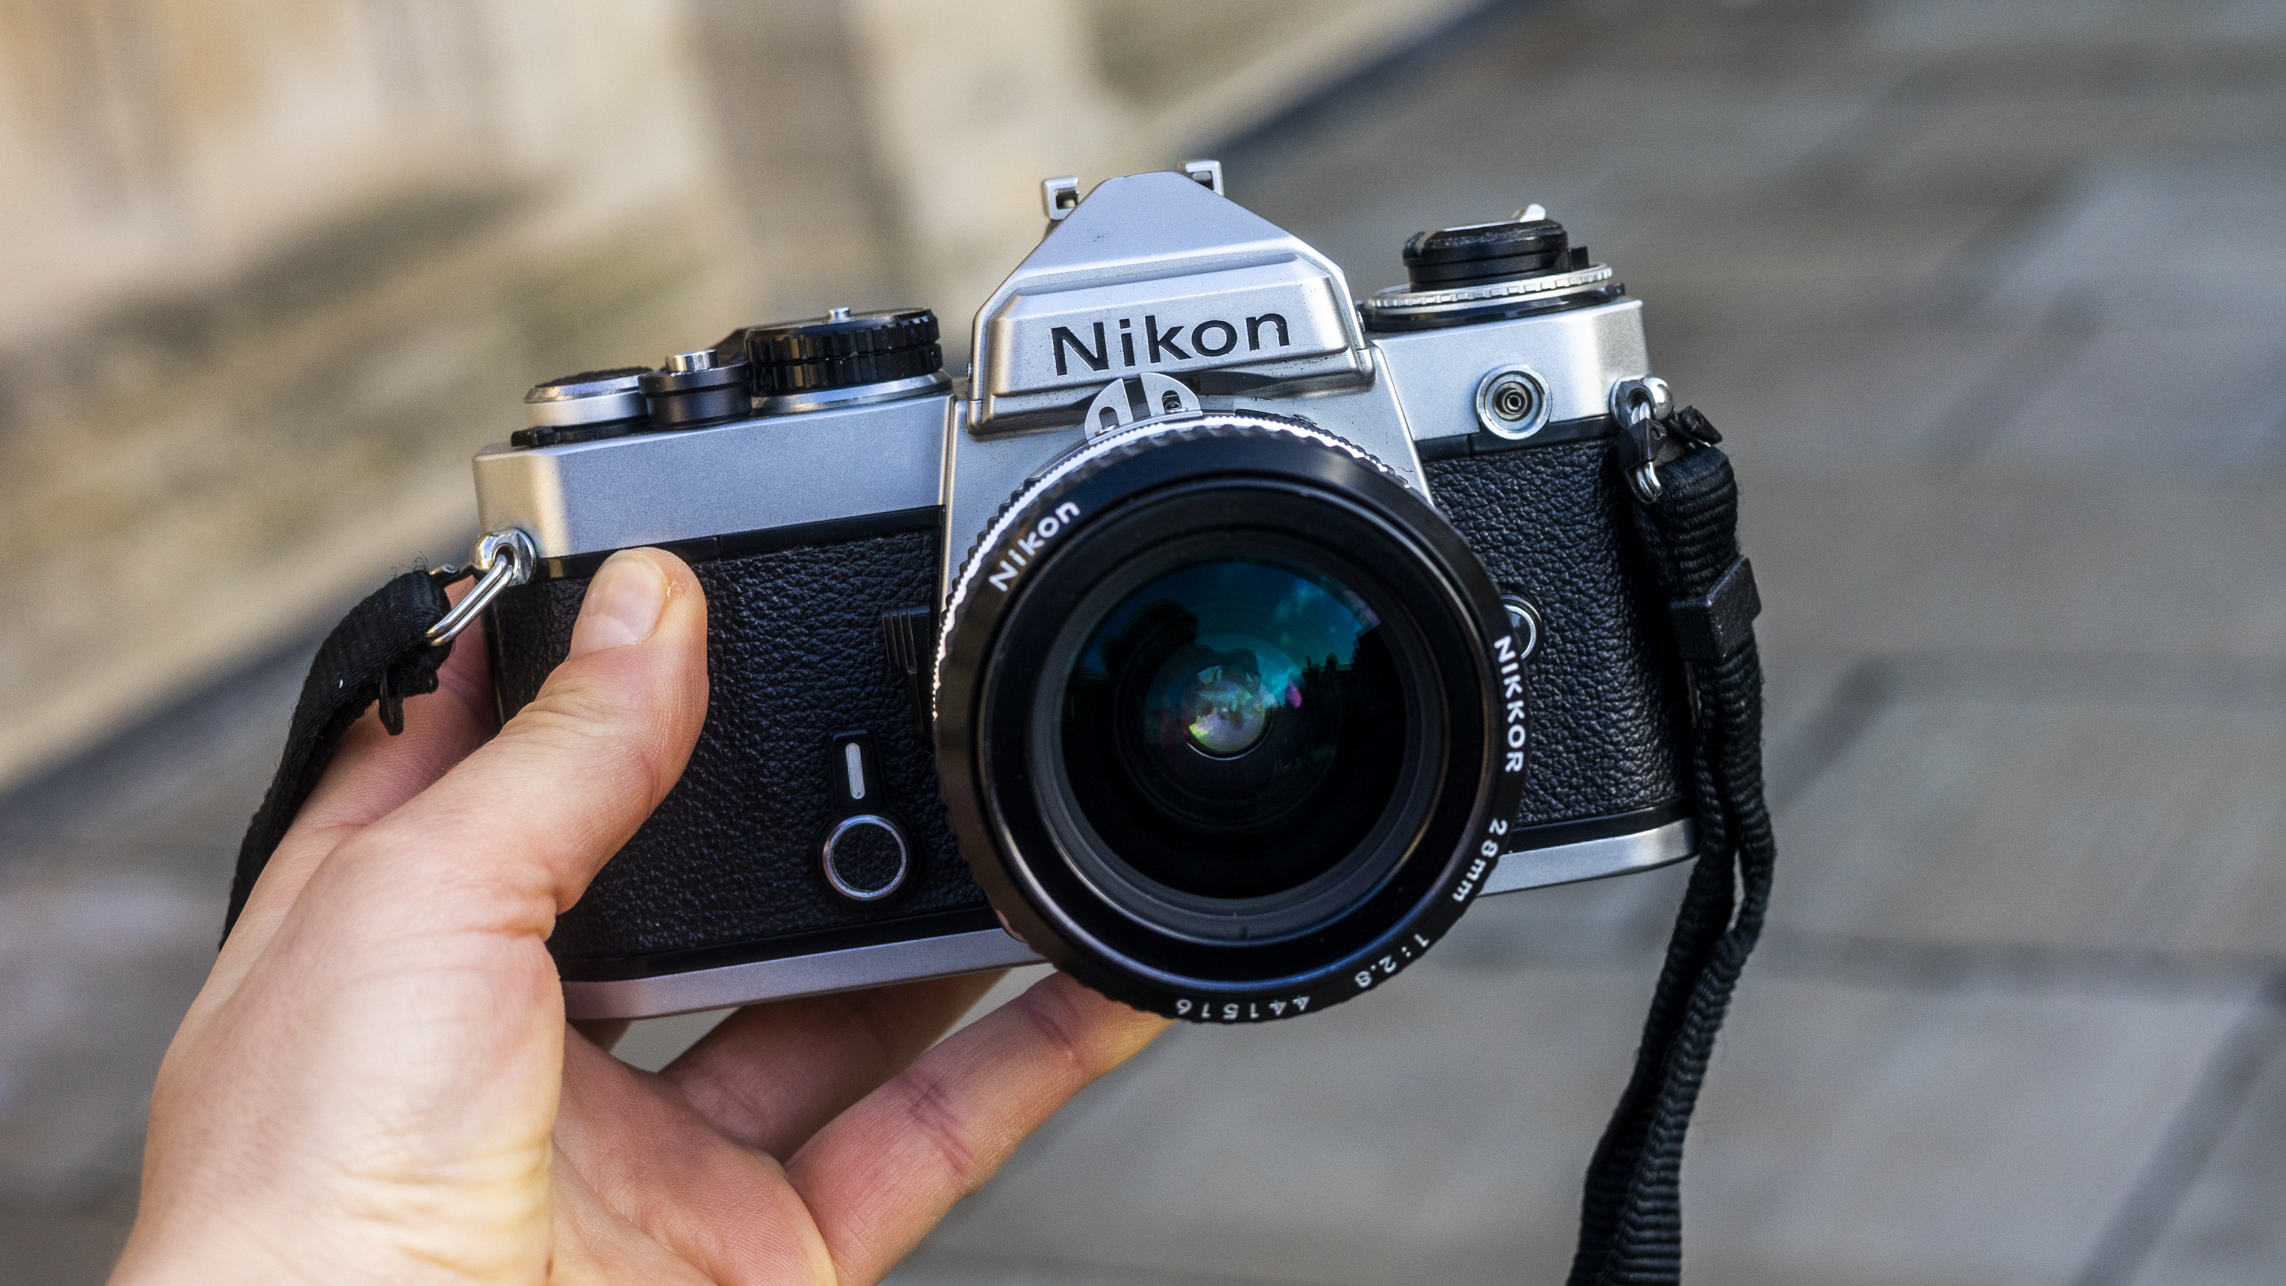 The Nikon Fe held by a photographer in front of a pavement